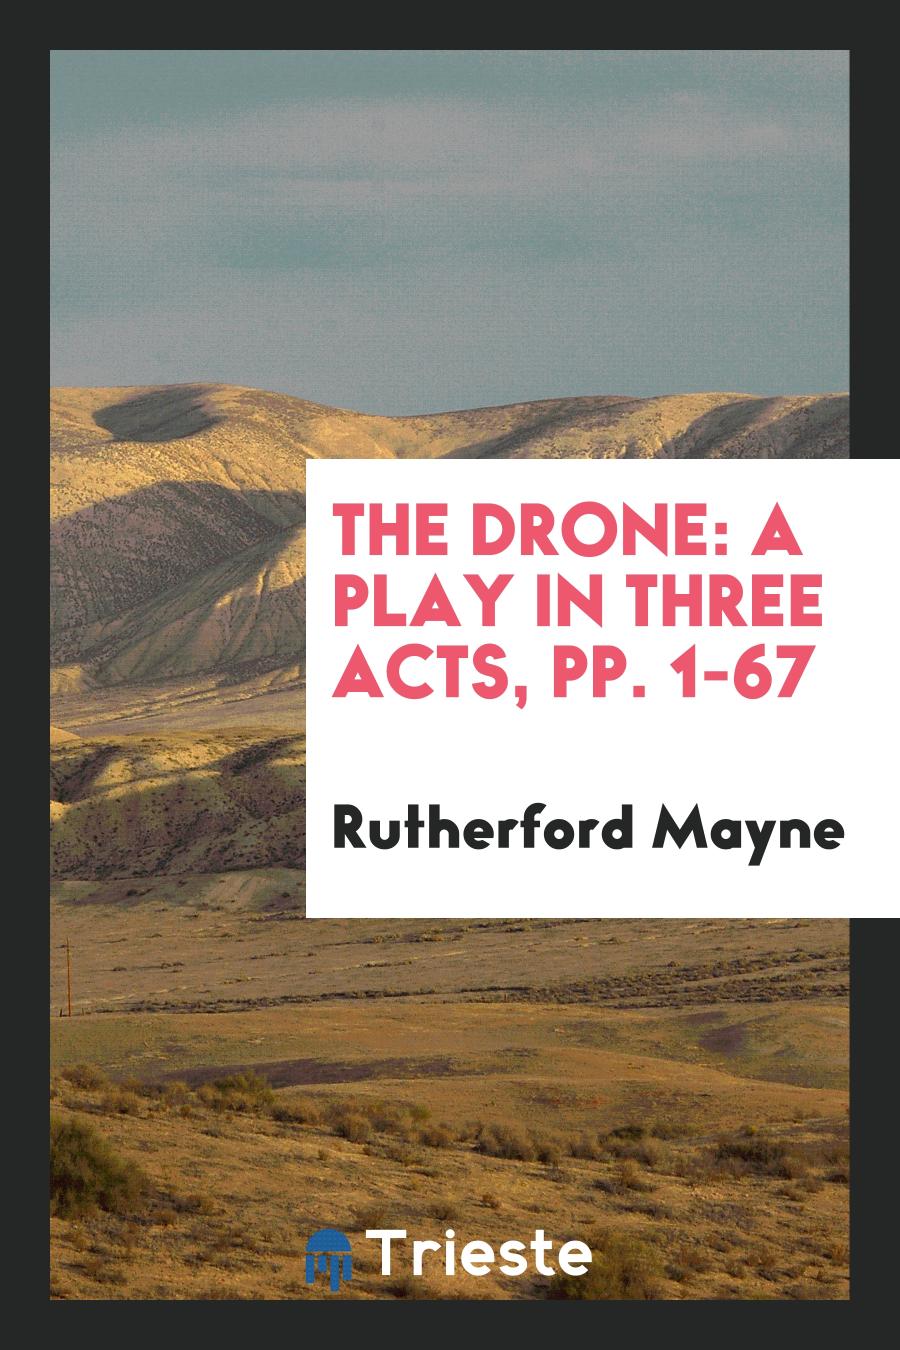 The Drone: A Play in Three Acts, pp. 1-67